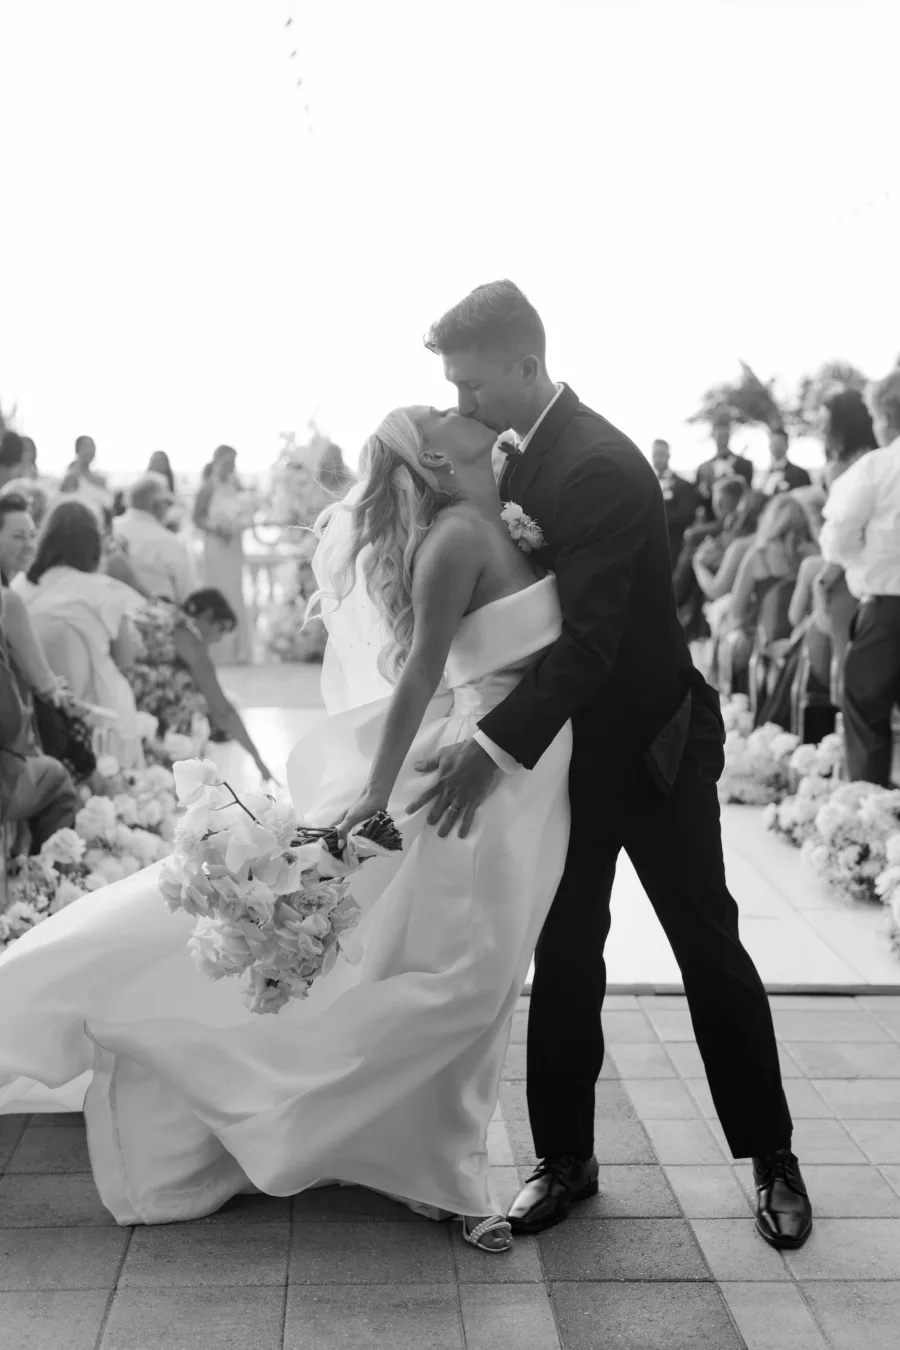 Romantic Bride and Groom Just Married Black and White Wedding Portrait | Tampa Bay Event Venue Westshore Yacht Club